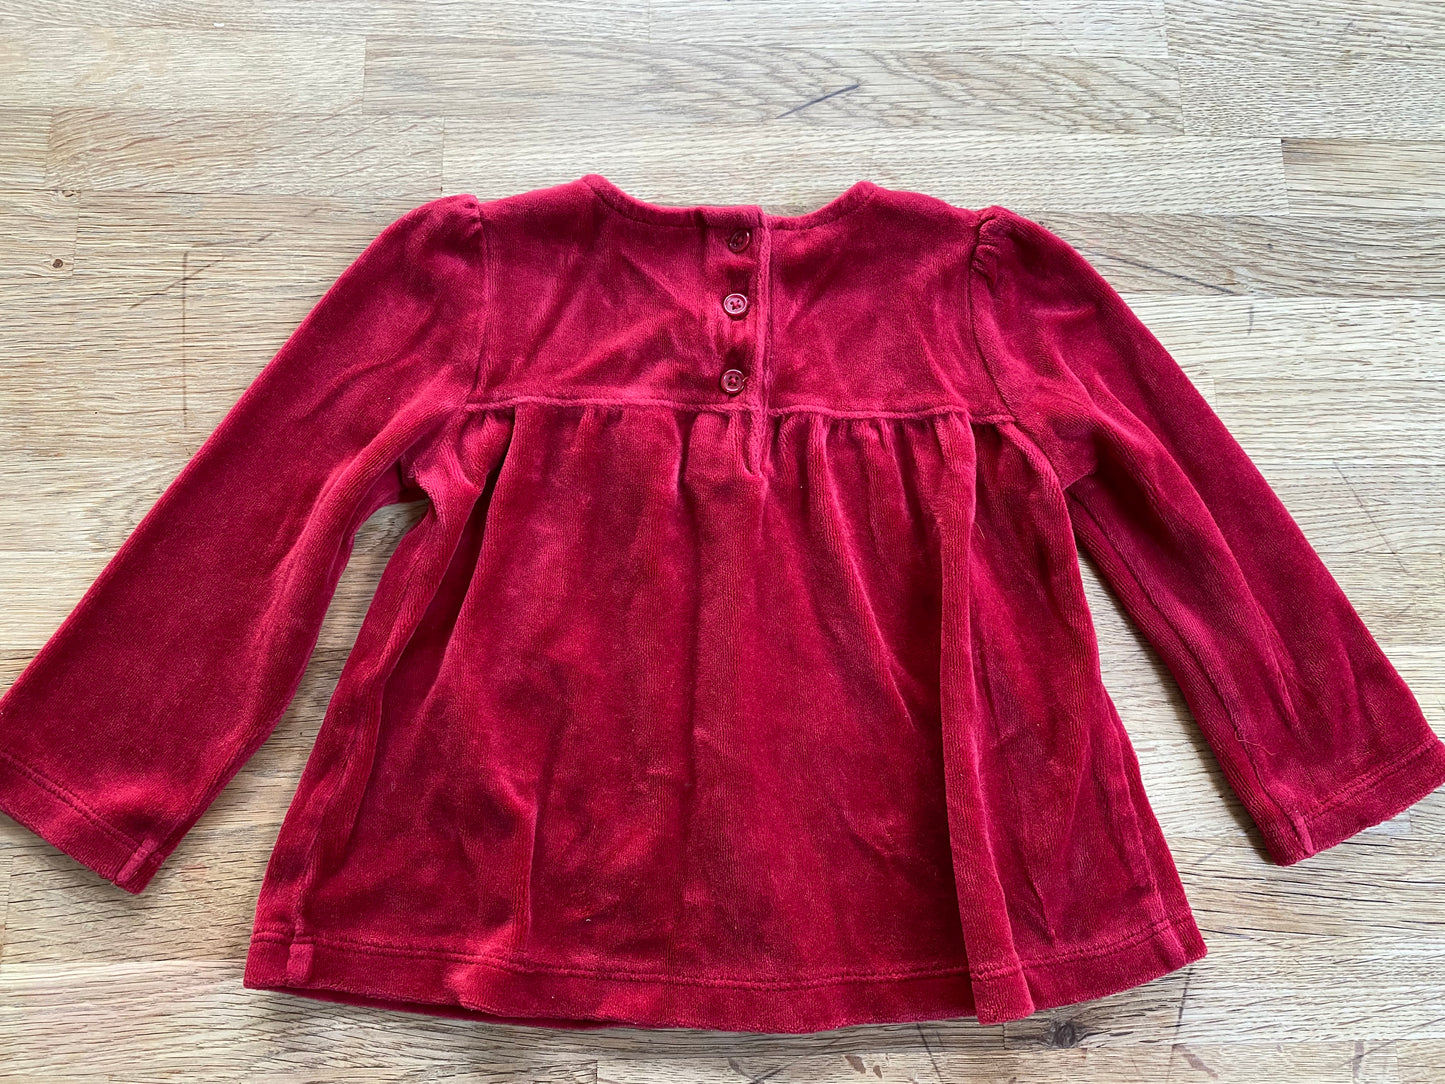 Red, Festive Holiday Top by Gymboree- Size 2t (Pre-Loved)